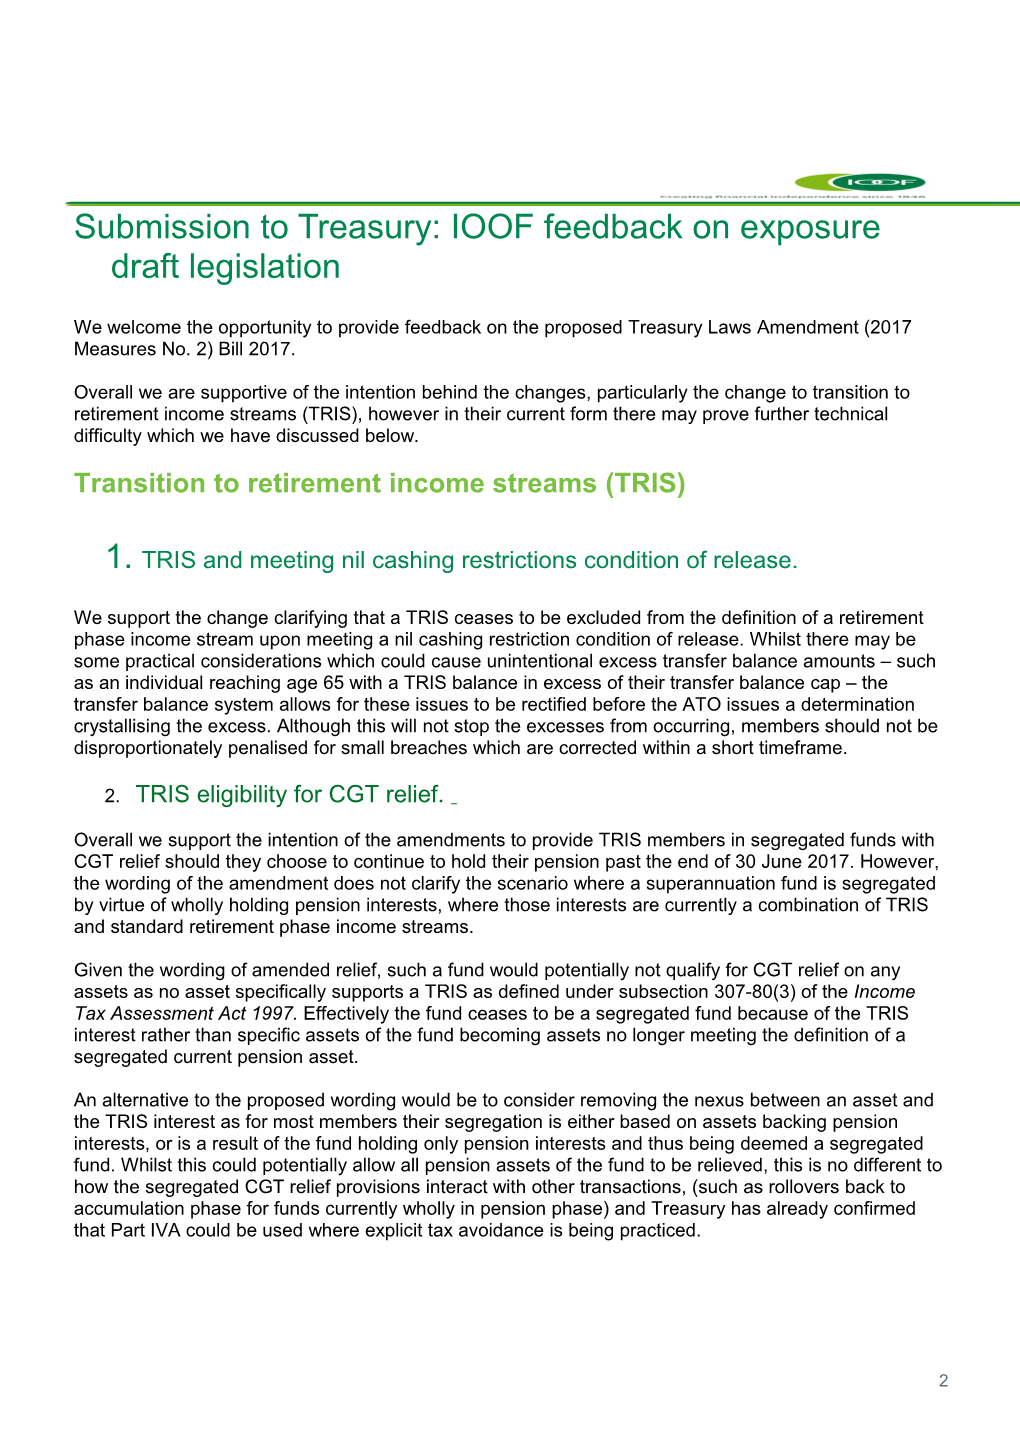 Superannuation Reform Package - Exposure Draft Minor and Technical Amendments Bill